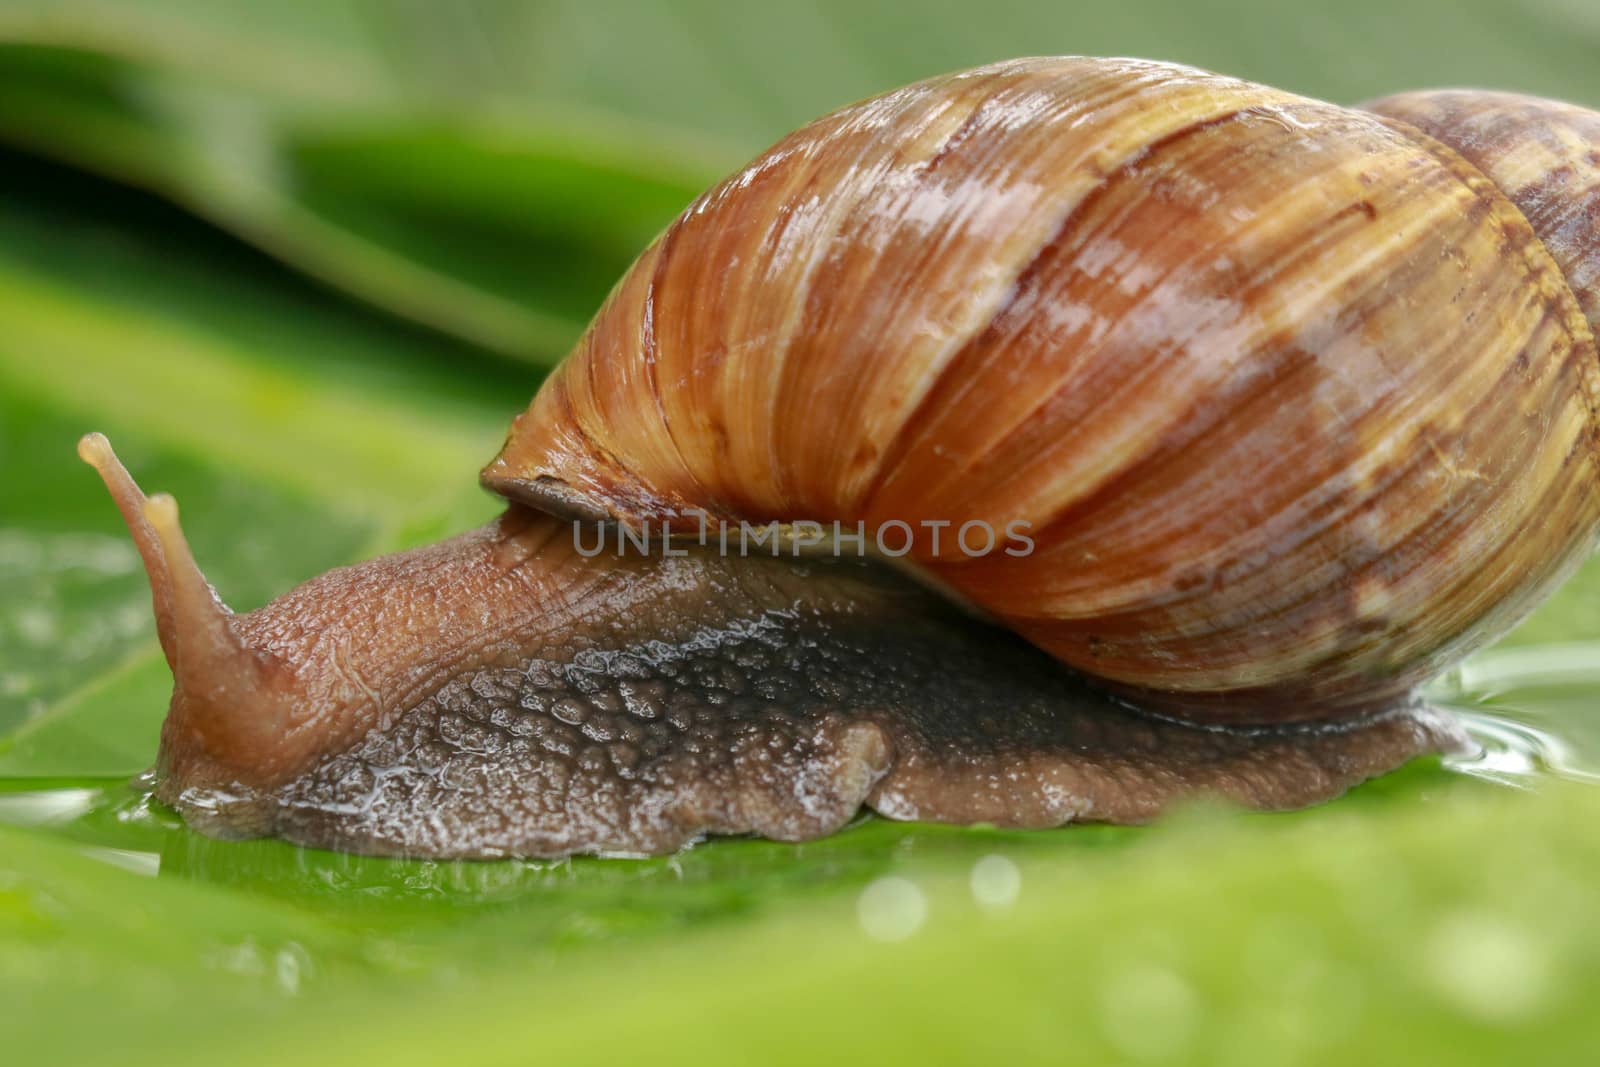 Side view of Achatina Fulica between water drops. A large adult snail climbs on a wet banana leaf in a tropical rainforest. Giant snail crawling by Sanatana2008